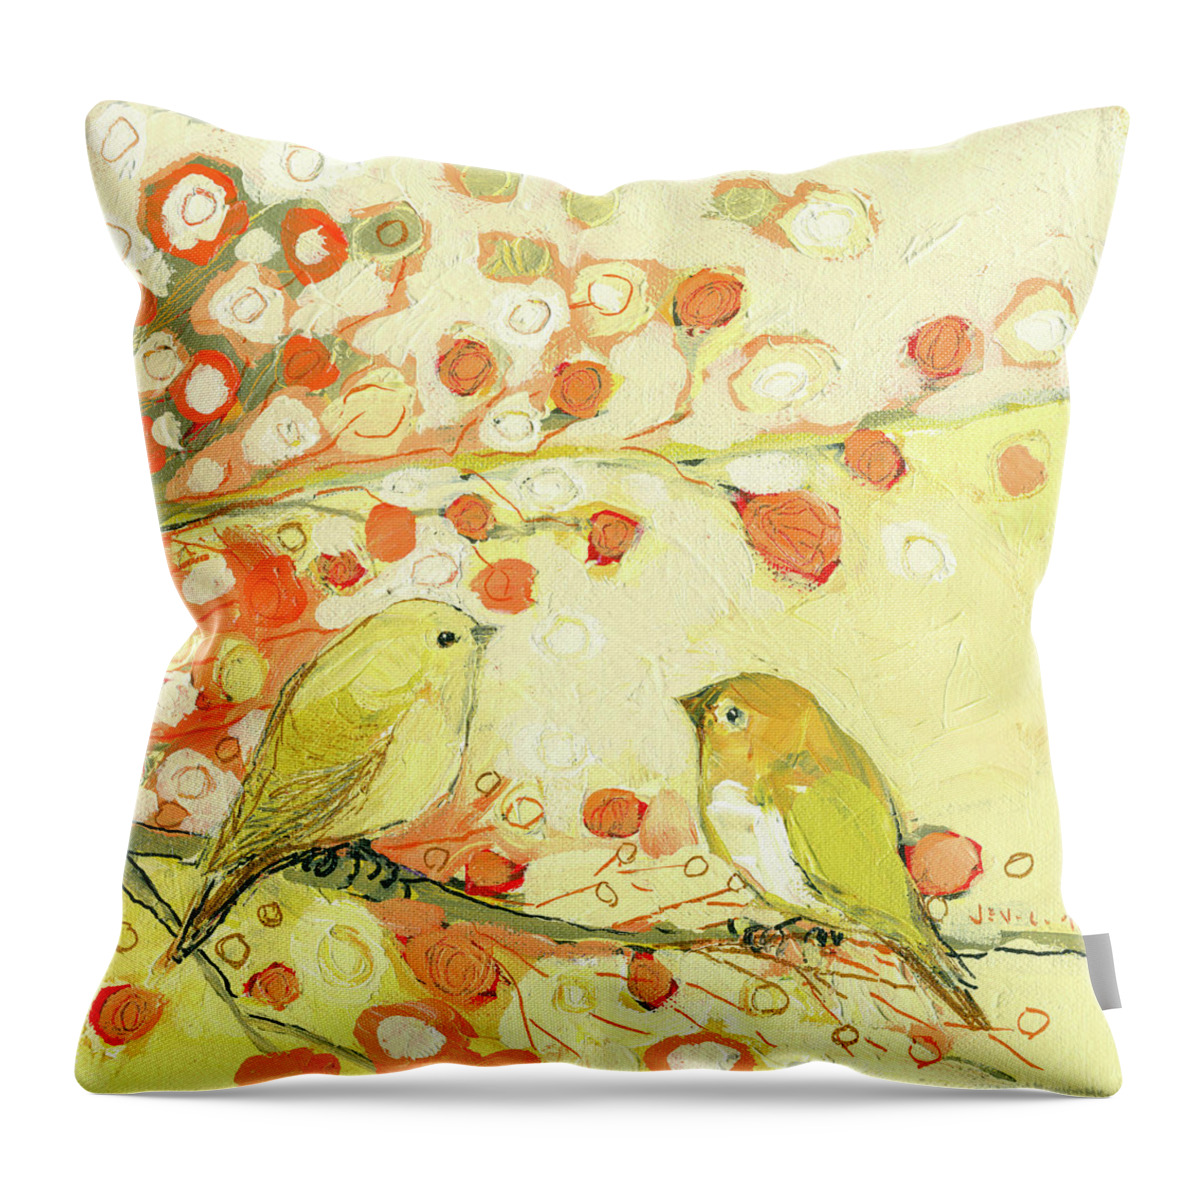 Bird Throw Pillow featuring the painting The Conversation by Jennifer Lommers